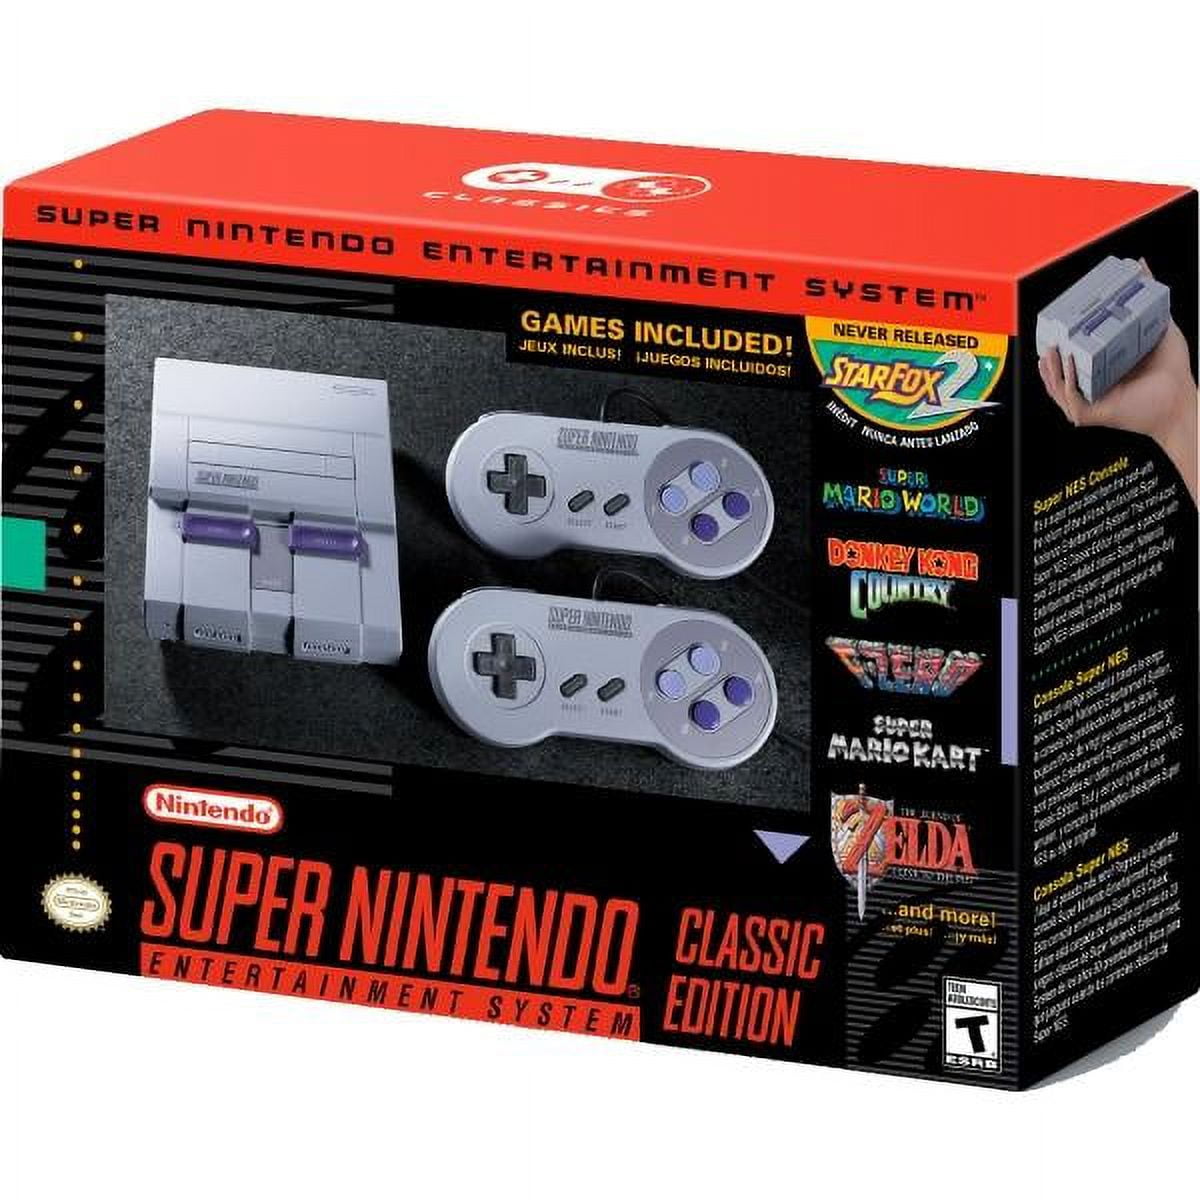 Is the Mini Super Nintendo a Collector's Item?